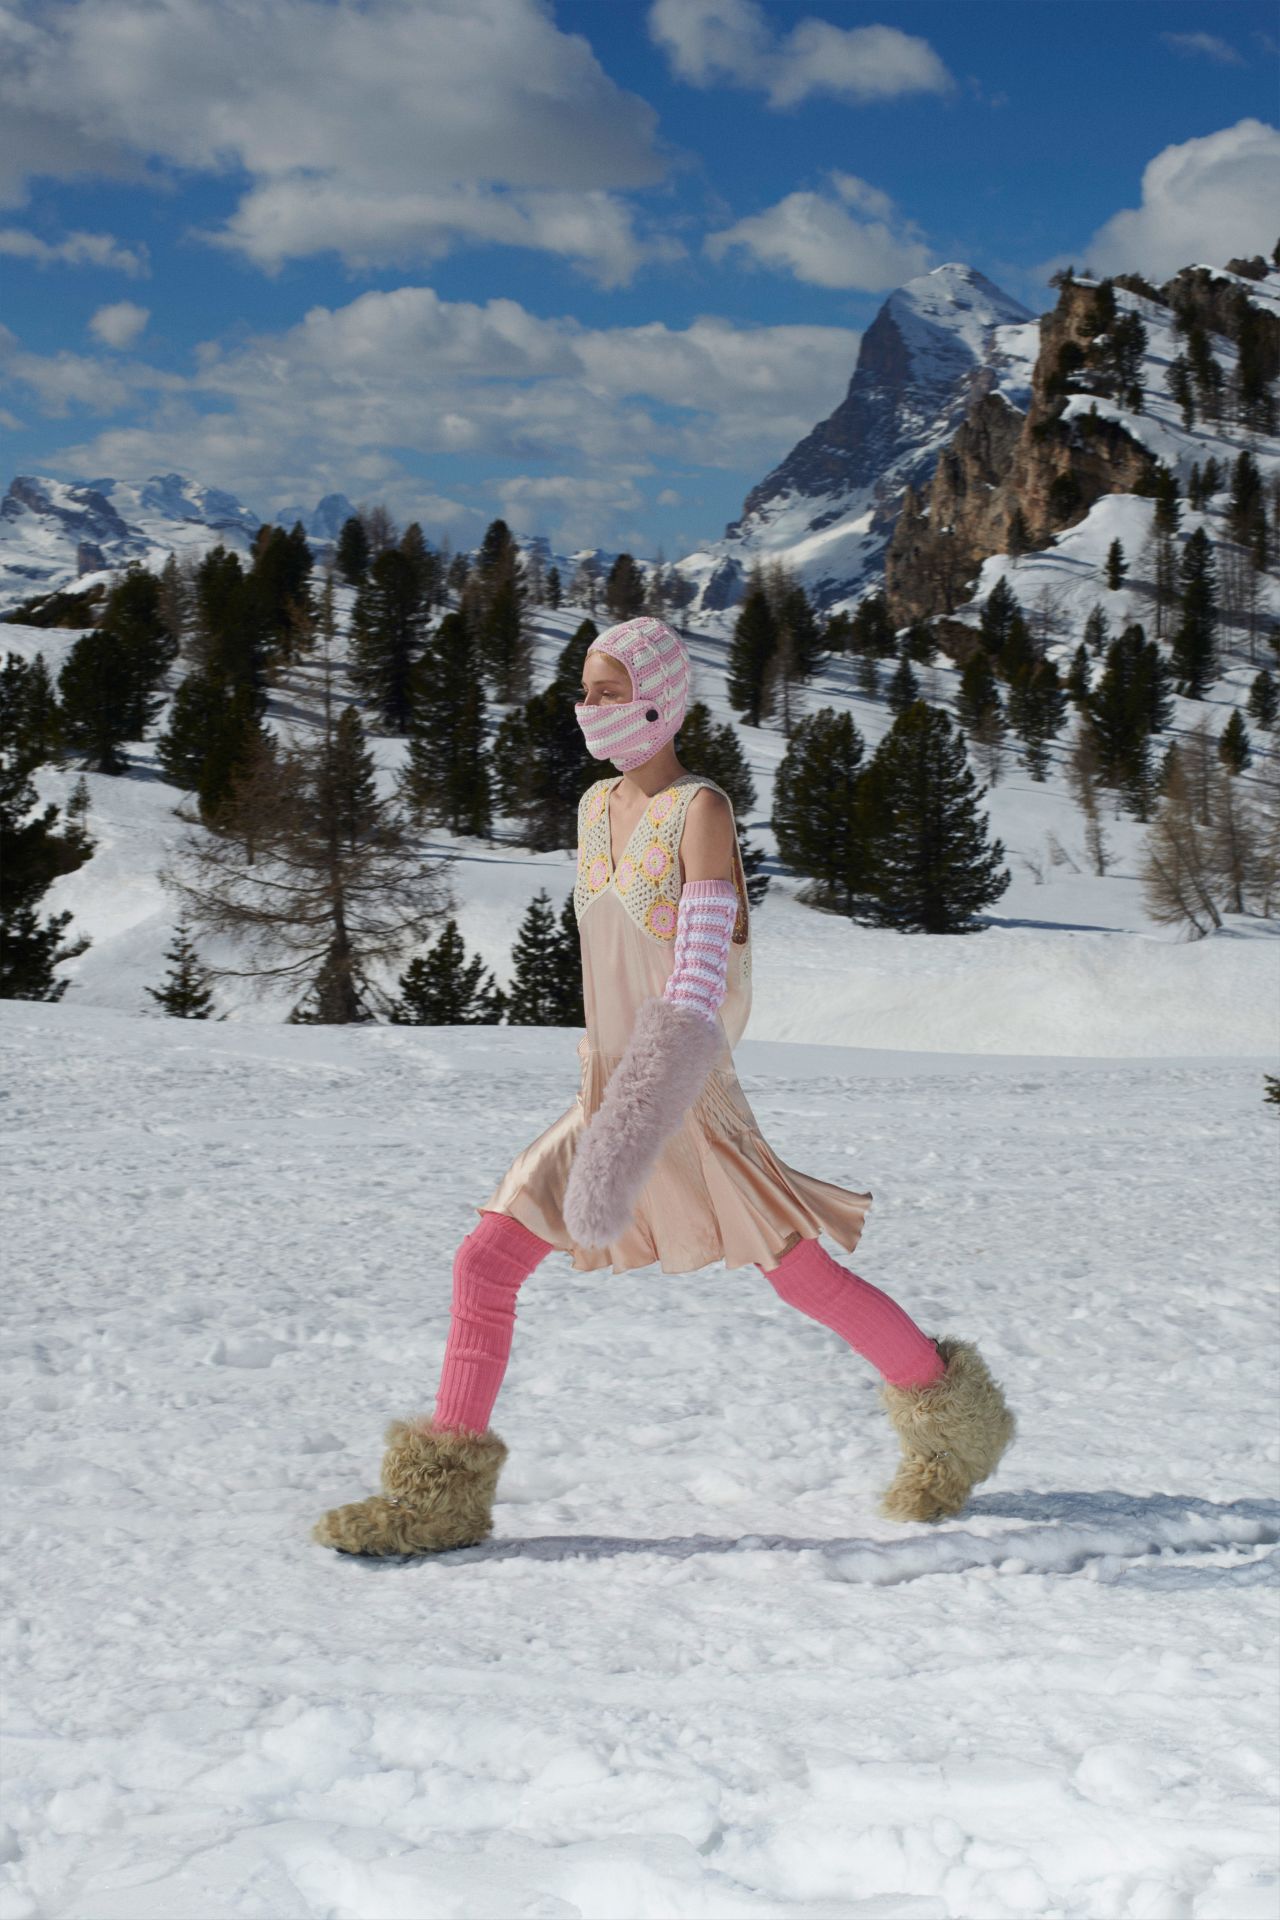 The collection, complete with knitted balaclavas, was a voyage through the mountains.